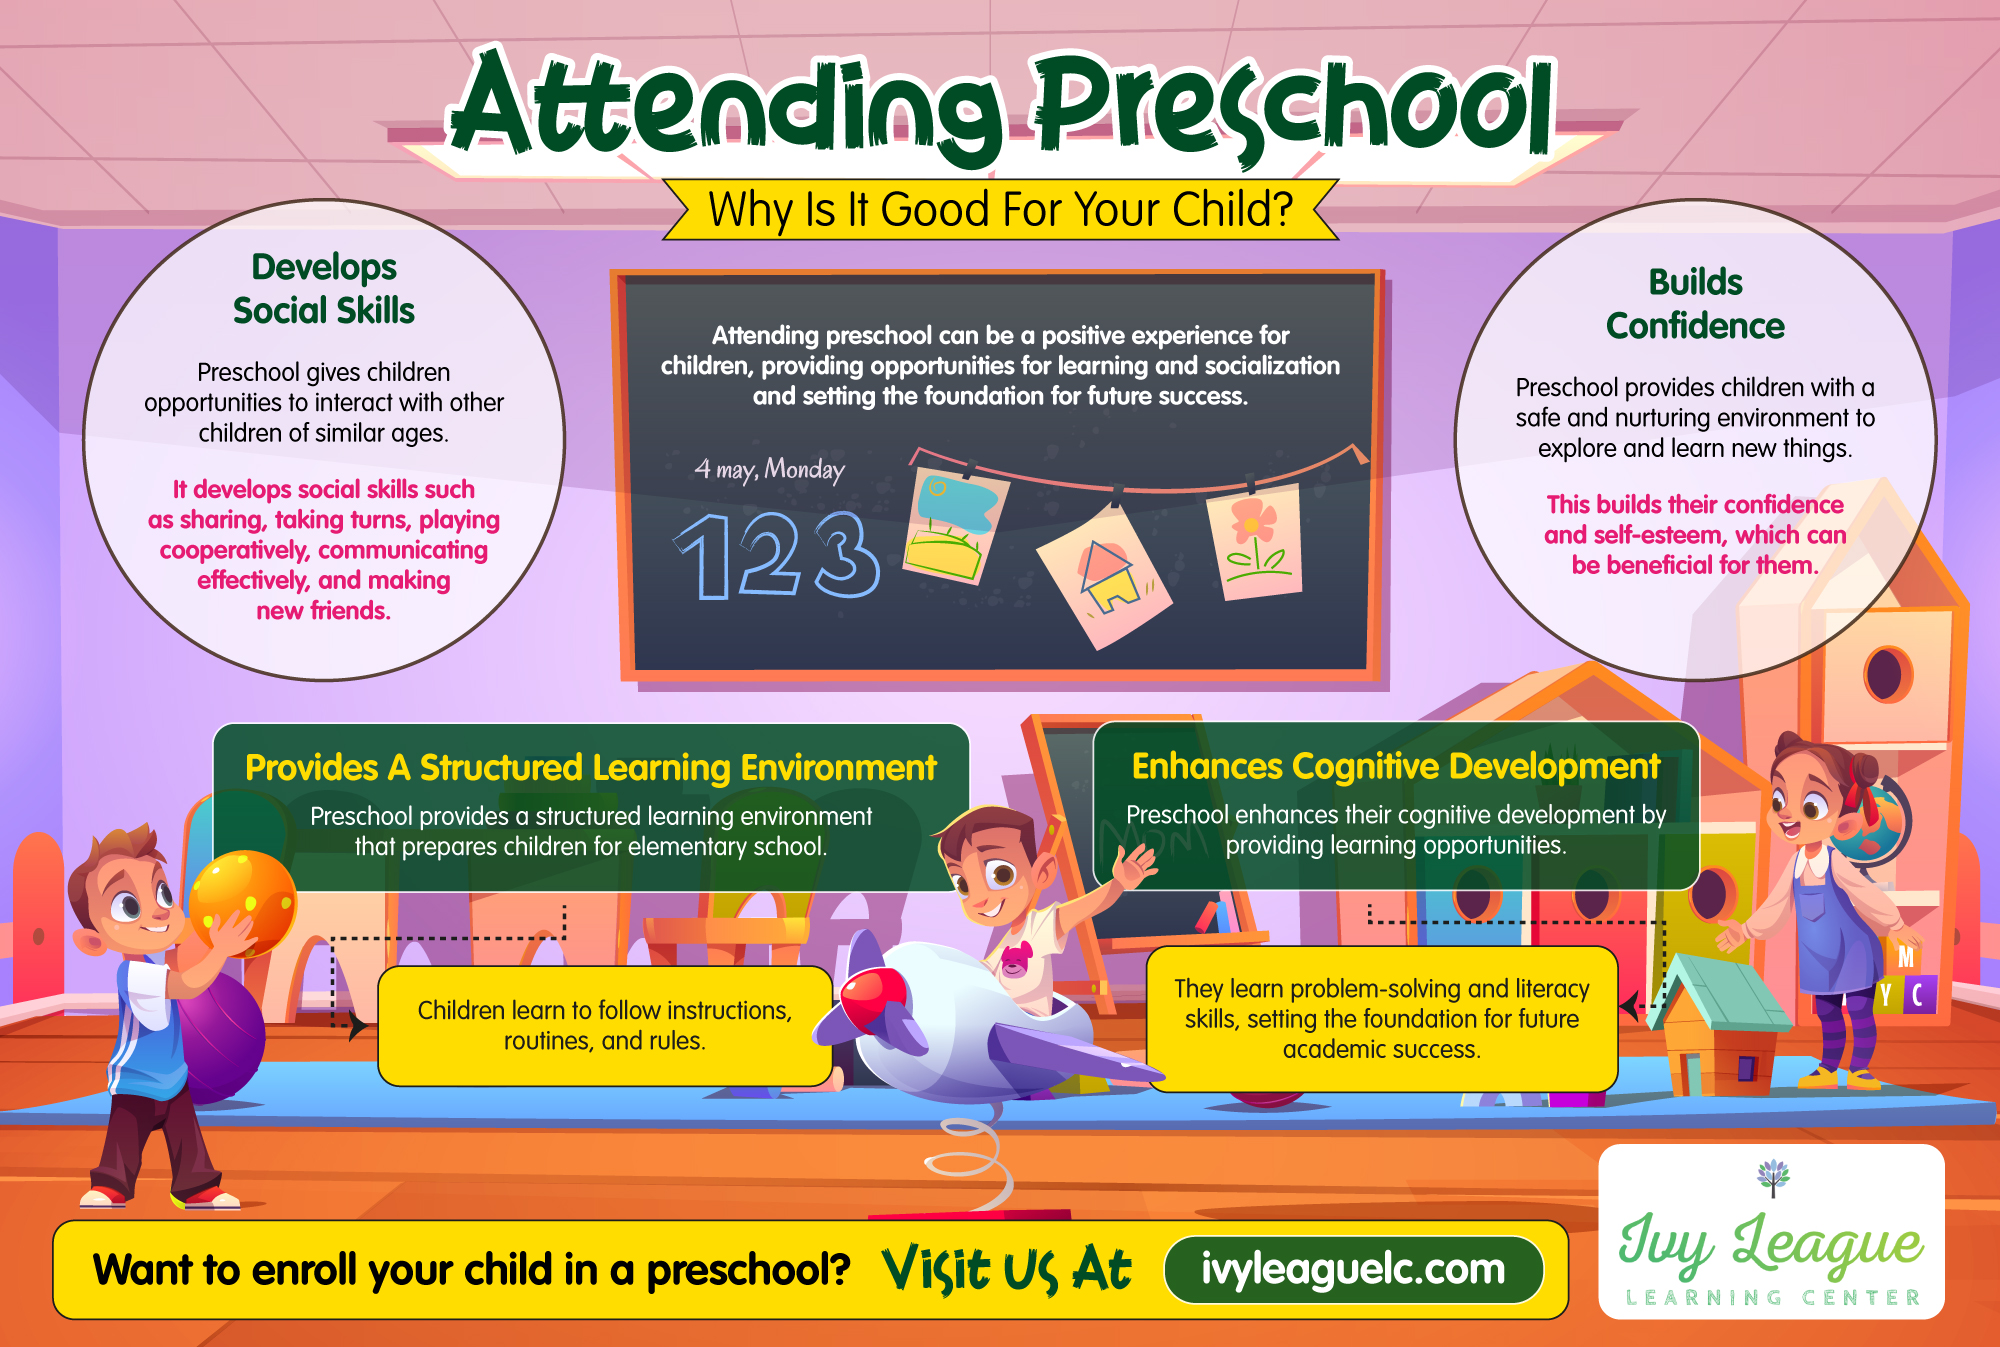 Attending Preschool Why Is It Good For Your Child?